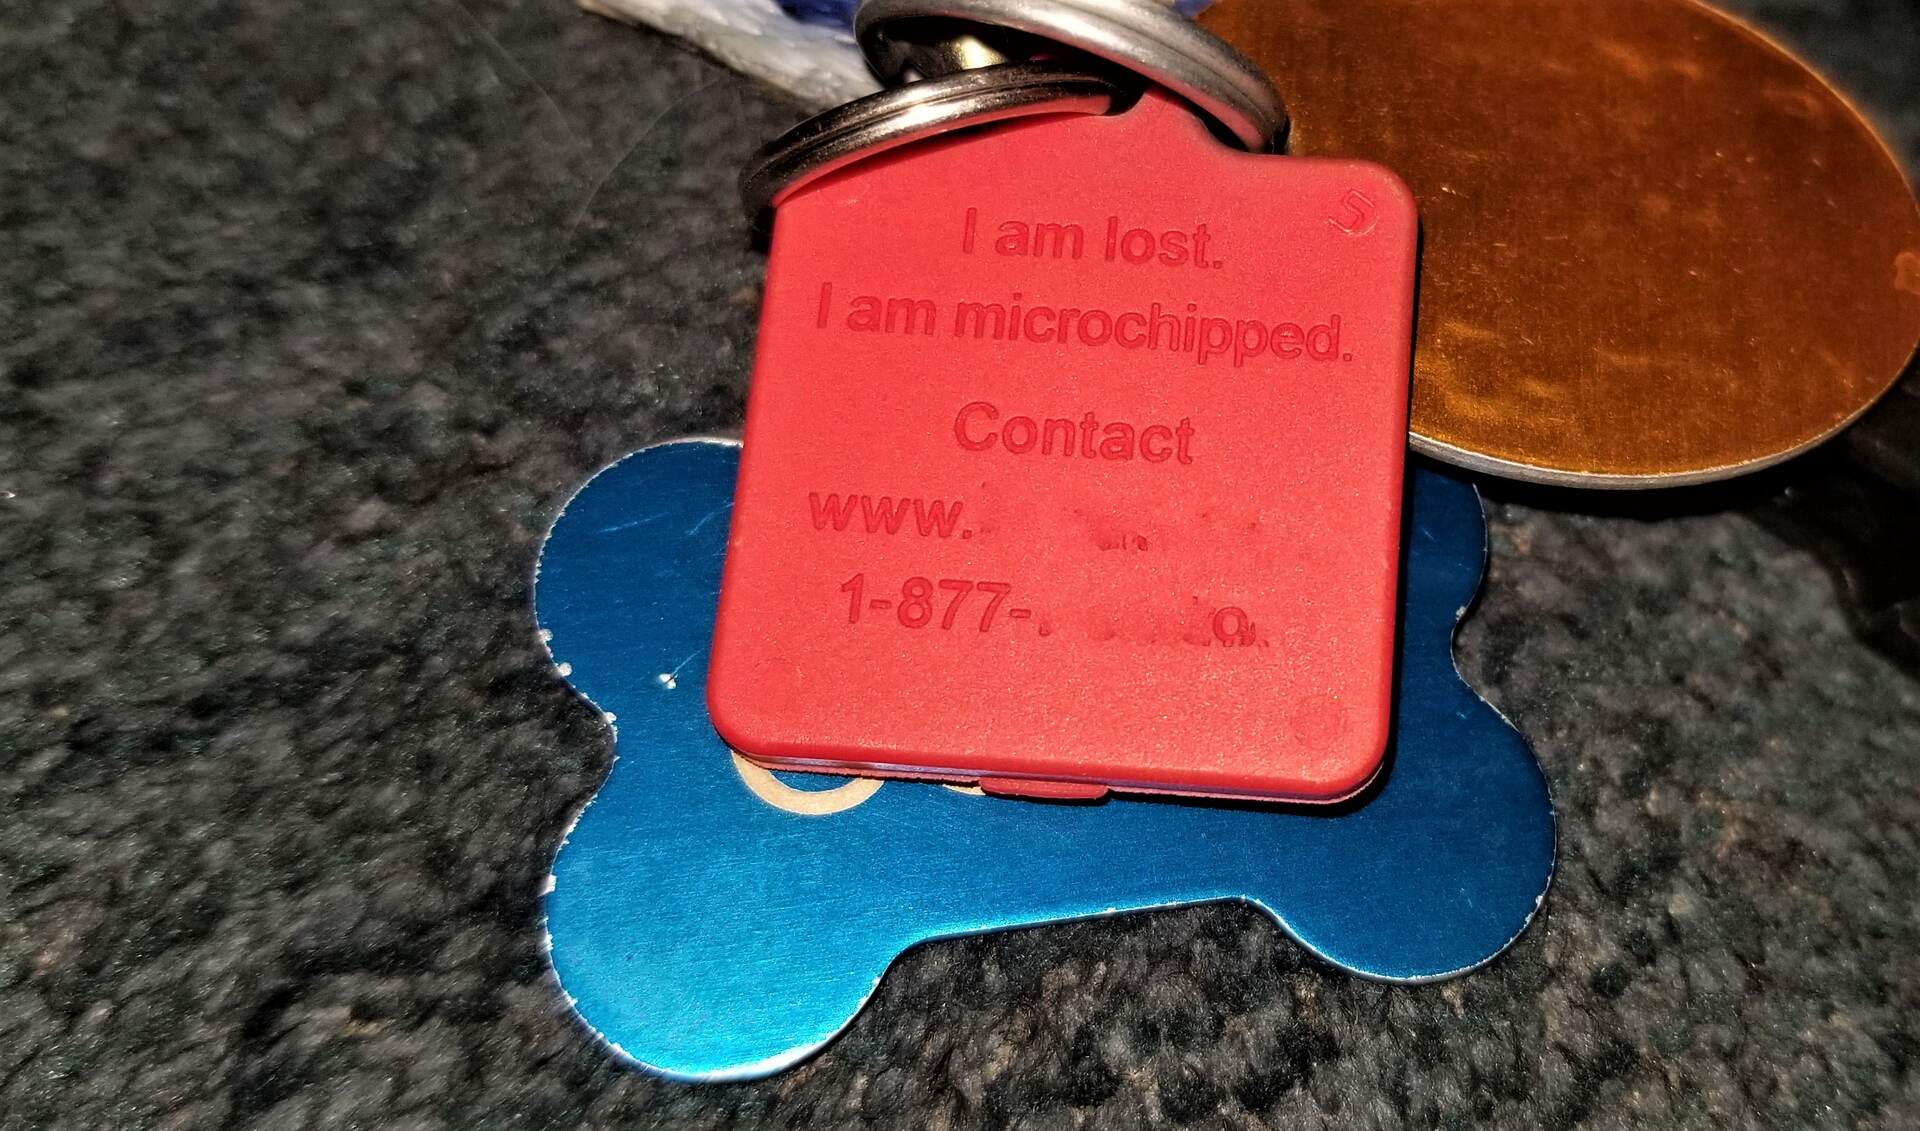 Dog ID tags containing microchip information